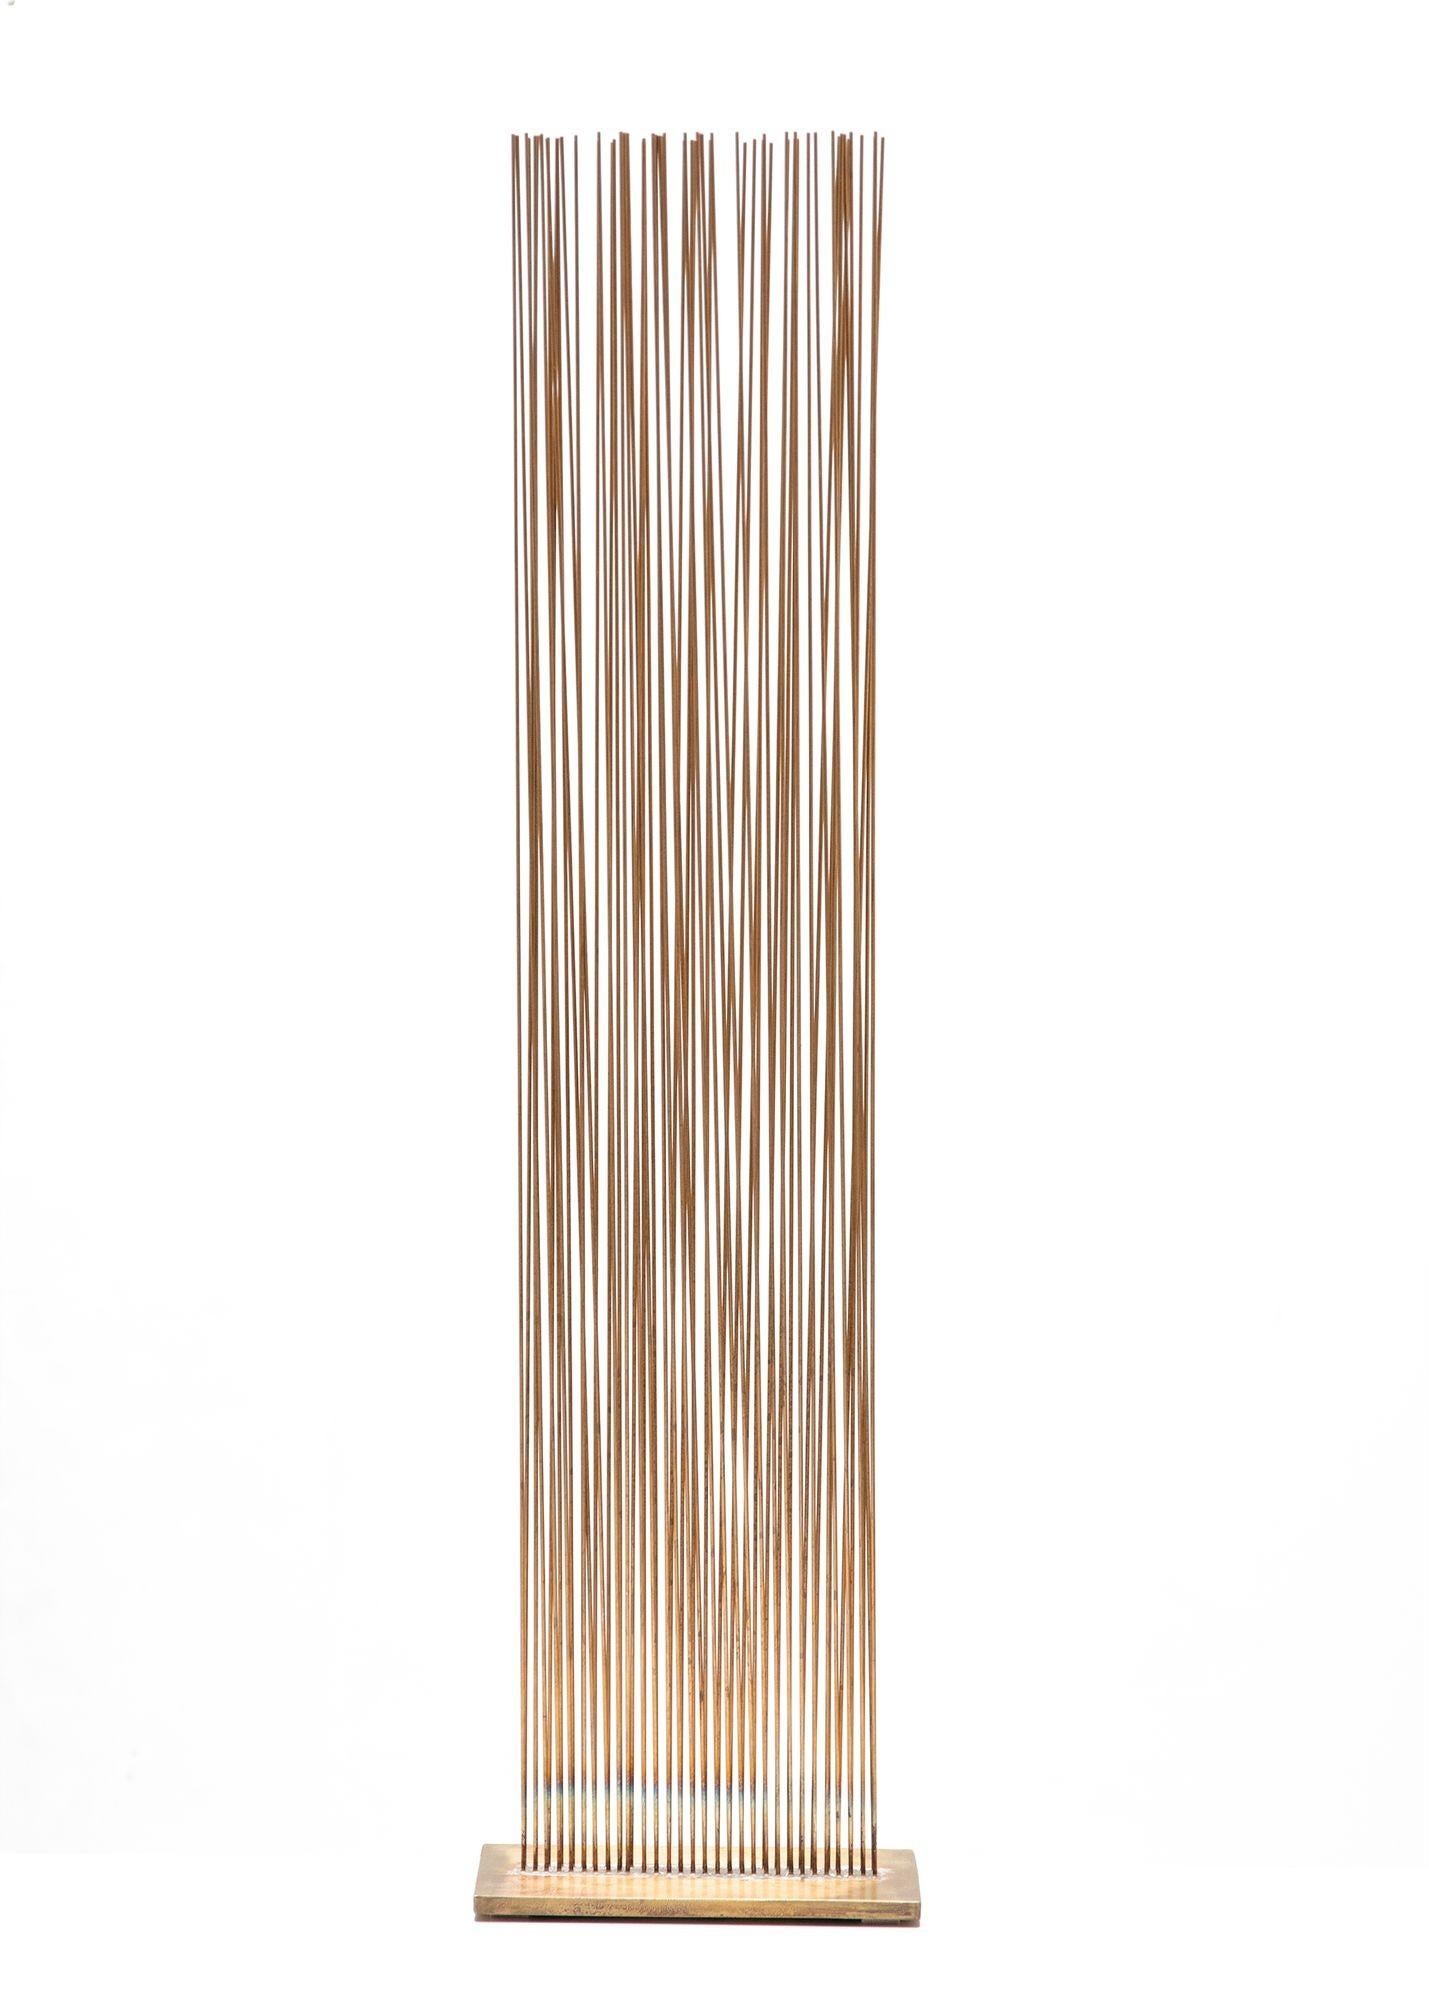 Val Bertoia Sonambient Sculpture
3' tall
Makes a beautiful resonant tone when the rods are shuffled
 
60 Silicon Bronze rods w/ silver in V-shaped rows affixed to a brass base
Stamped with the serial number B-1785
 
 
 
Accompanied by a COA